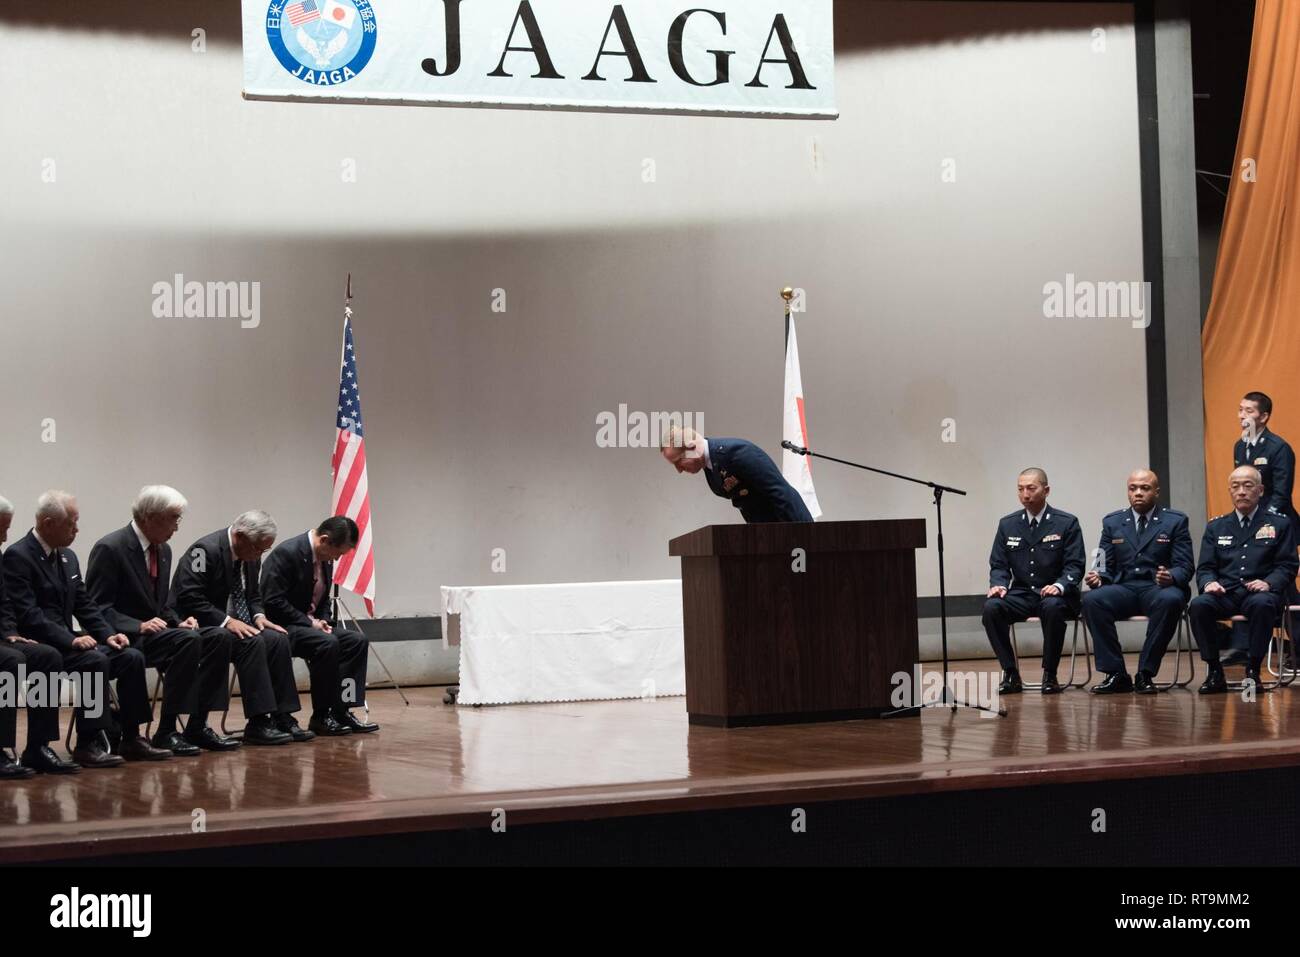 U.S. Air Force Brig. Gen. Case Cunningham, 18th Wing commander, recognizes the accomplishments of the Japan-America Air Force Goodwill Association awardees and the importance of partnership during the 2018 JAAGA Awards Ceremony January 31, 2019, at Naha Air Base, Japan. Leadership from Naha Air Base and the 18th Wing came together to recognize the accomplishments of their Japan-America Air Force Goodwill Association awardees and the importance of partnership during the 2018 JAAGA Awards Ceremony. Stock Photo